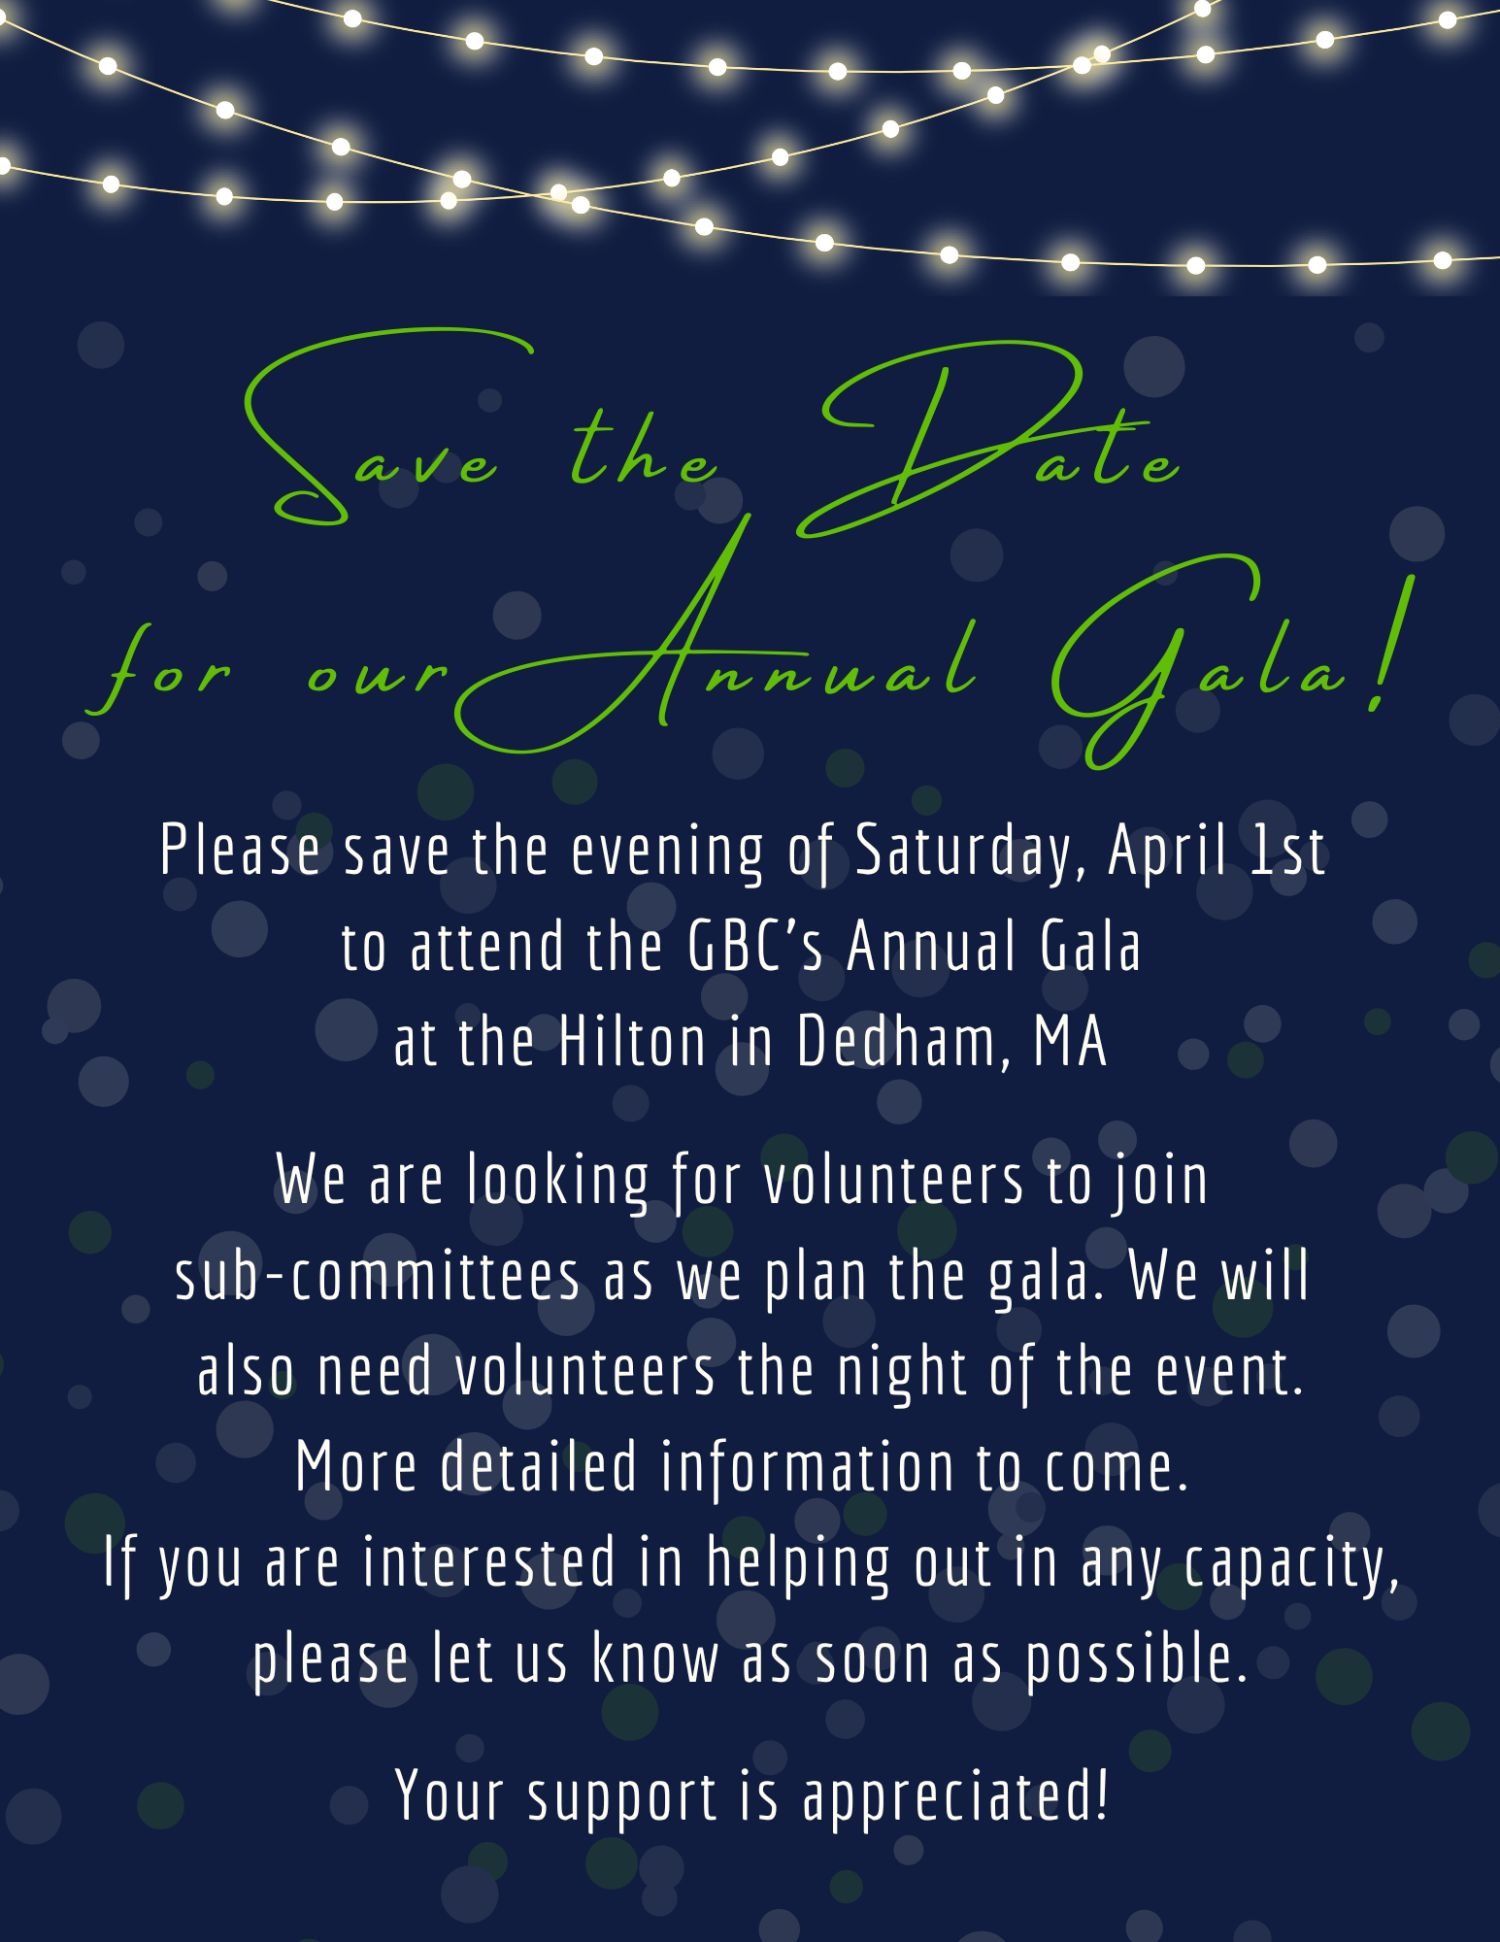 Image description: save the date for our annual gala! Please save the evening of Saturday, April 1 to attend the GBC's annual gala at the Hilton in Dedham, MA. We are looking for volunteers to join subcommittees as we plan the gala. We will also need volunteers the night of the event. More detailed information to come. if you are interested in helping out in any capacity please let us know as soon as possible. Your support is appreciated!